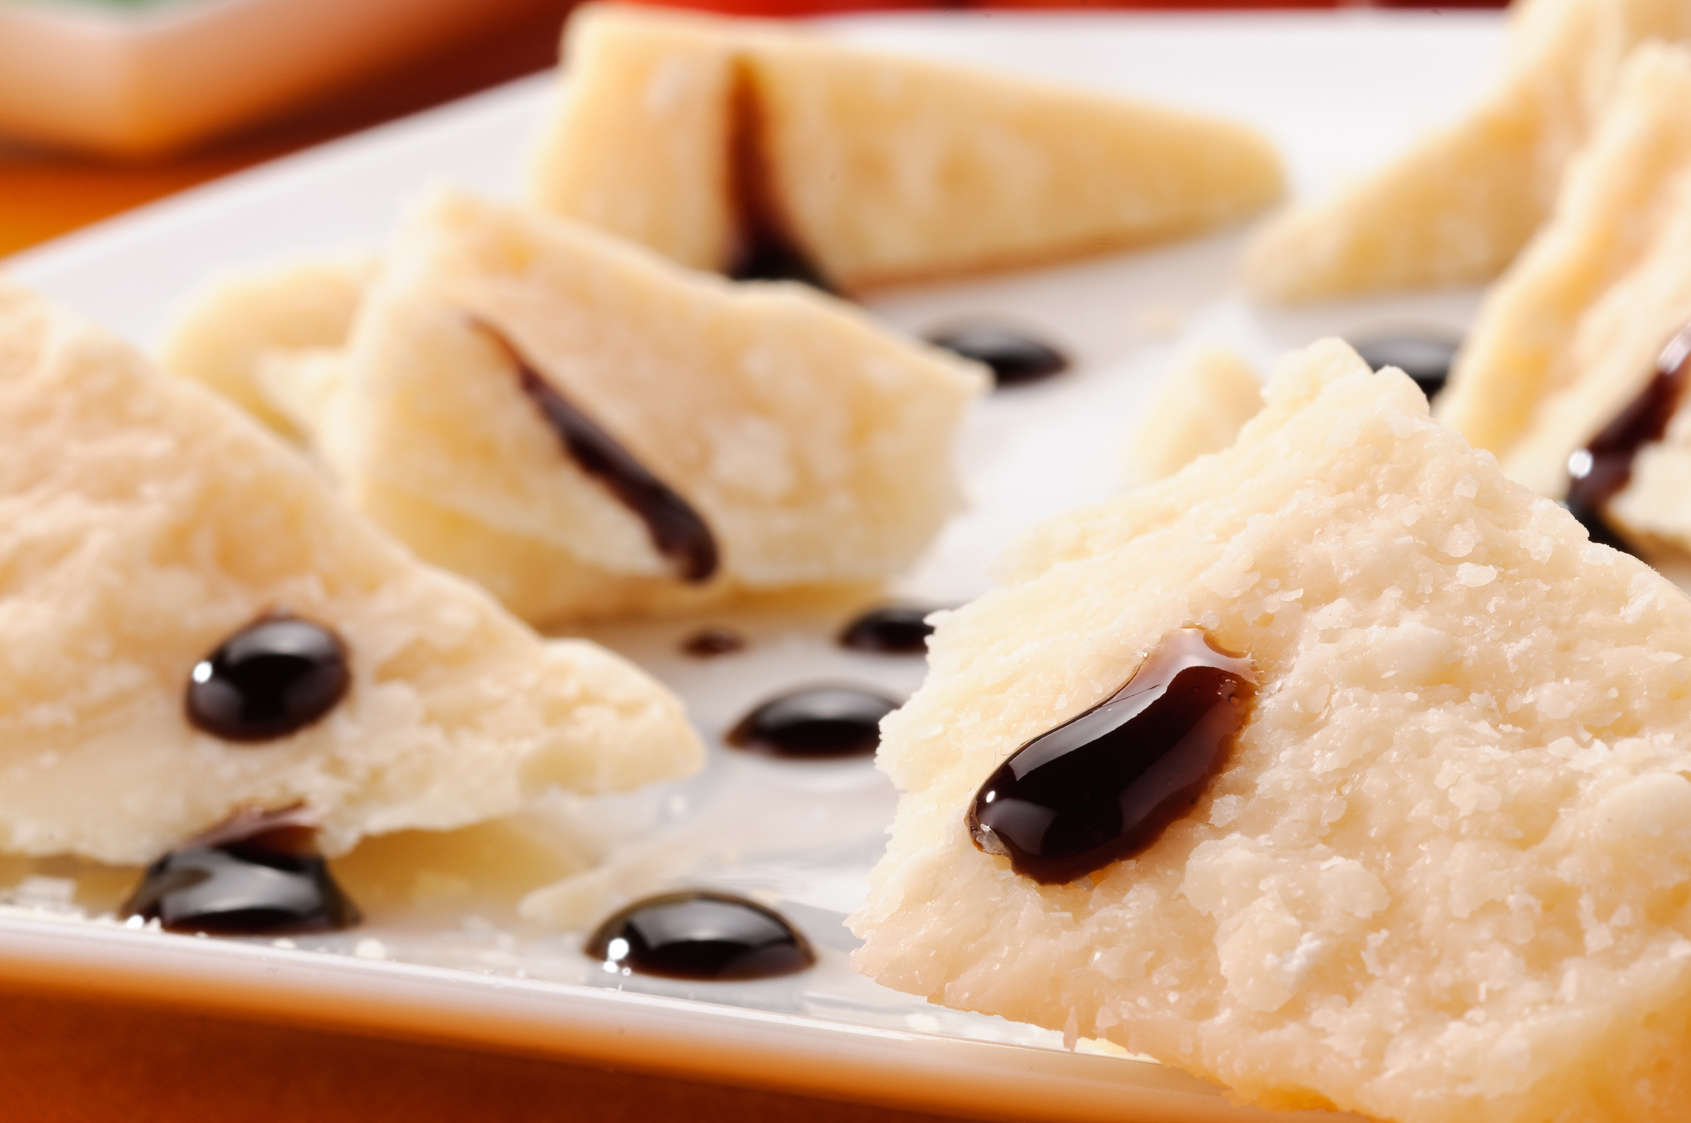 Aged Parmigiano Reggiano with aged Balsamic Vinegar